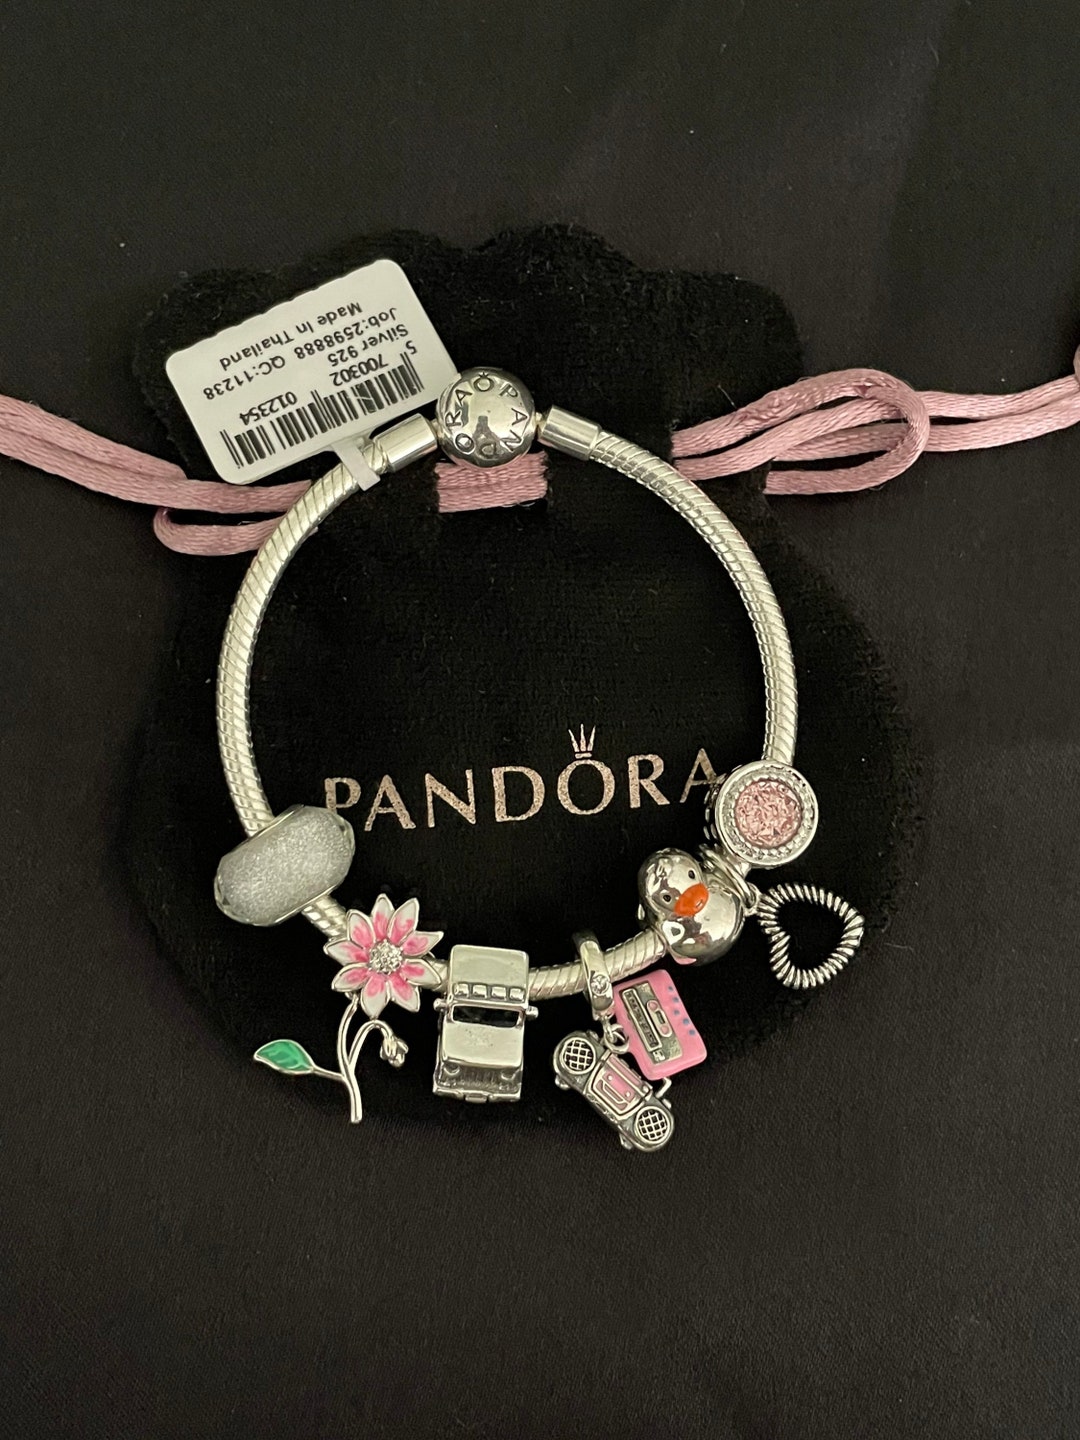 Pandora Bracelet With Pink Jeep Themed Charms - Etsy